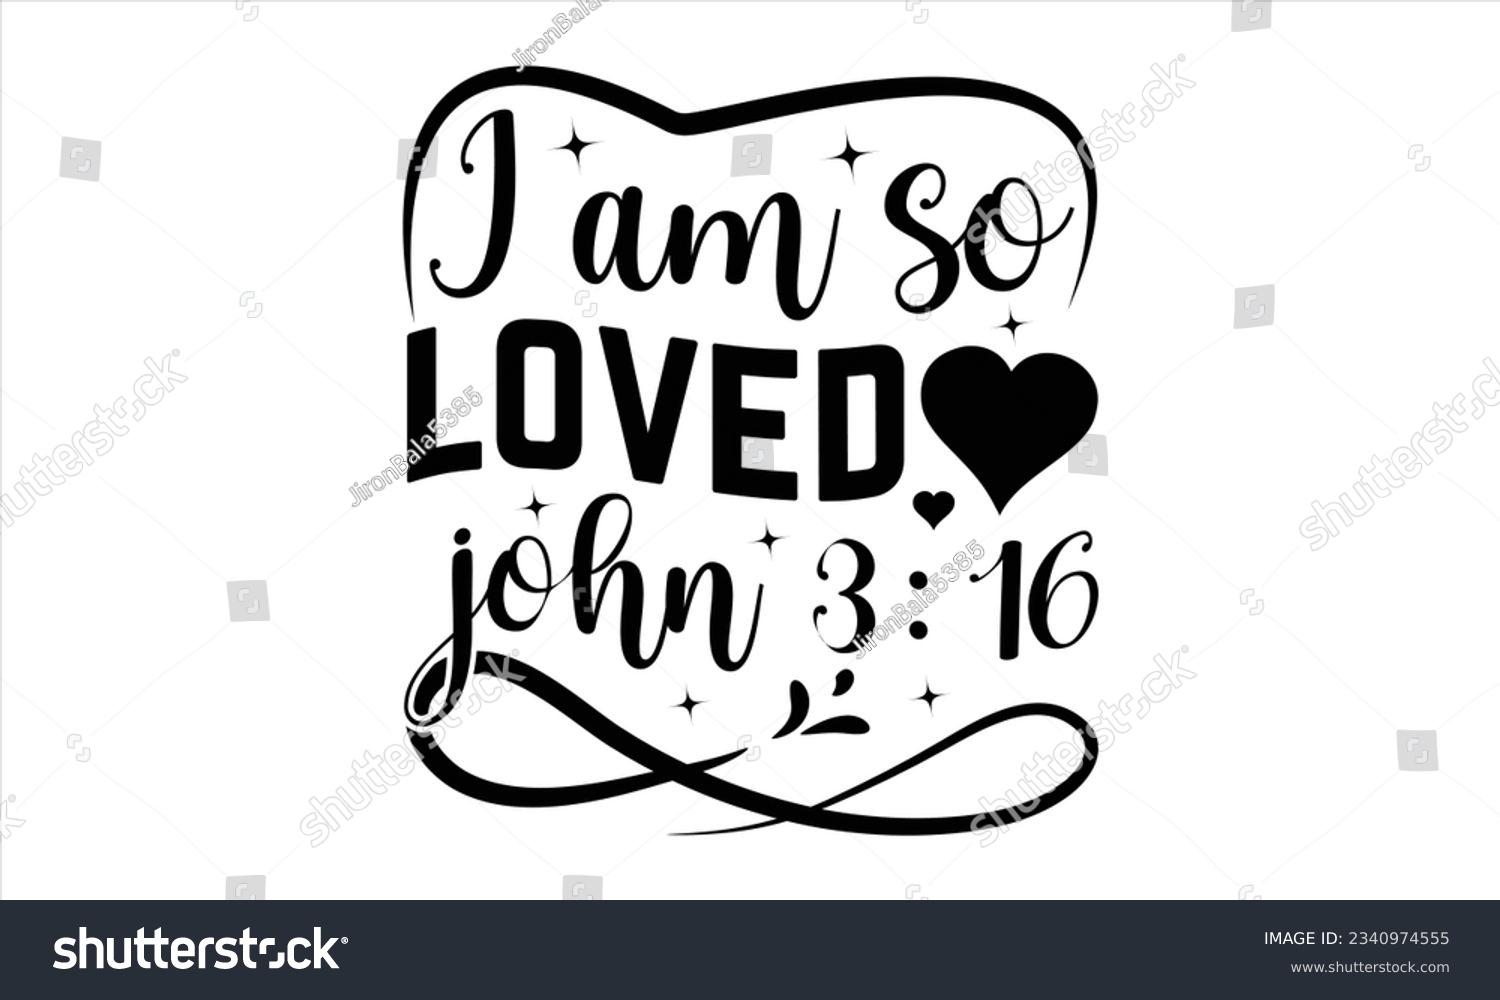 SVG of  I Am So Loved John 3:16 - Valentines Day t shirt design Design, Calligraphy graphic design, Illustration for prints on t-shirts and bags, posters, cards, Hand drawn lettering phrase, for Cutting Mach svg